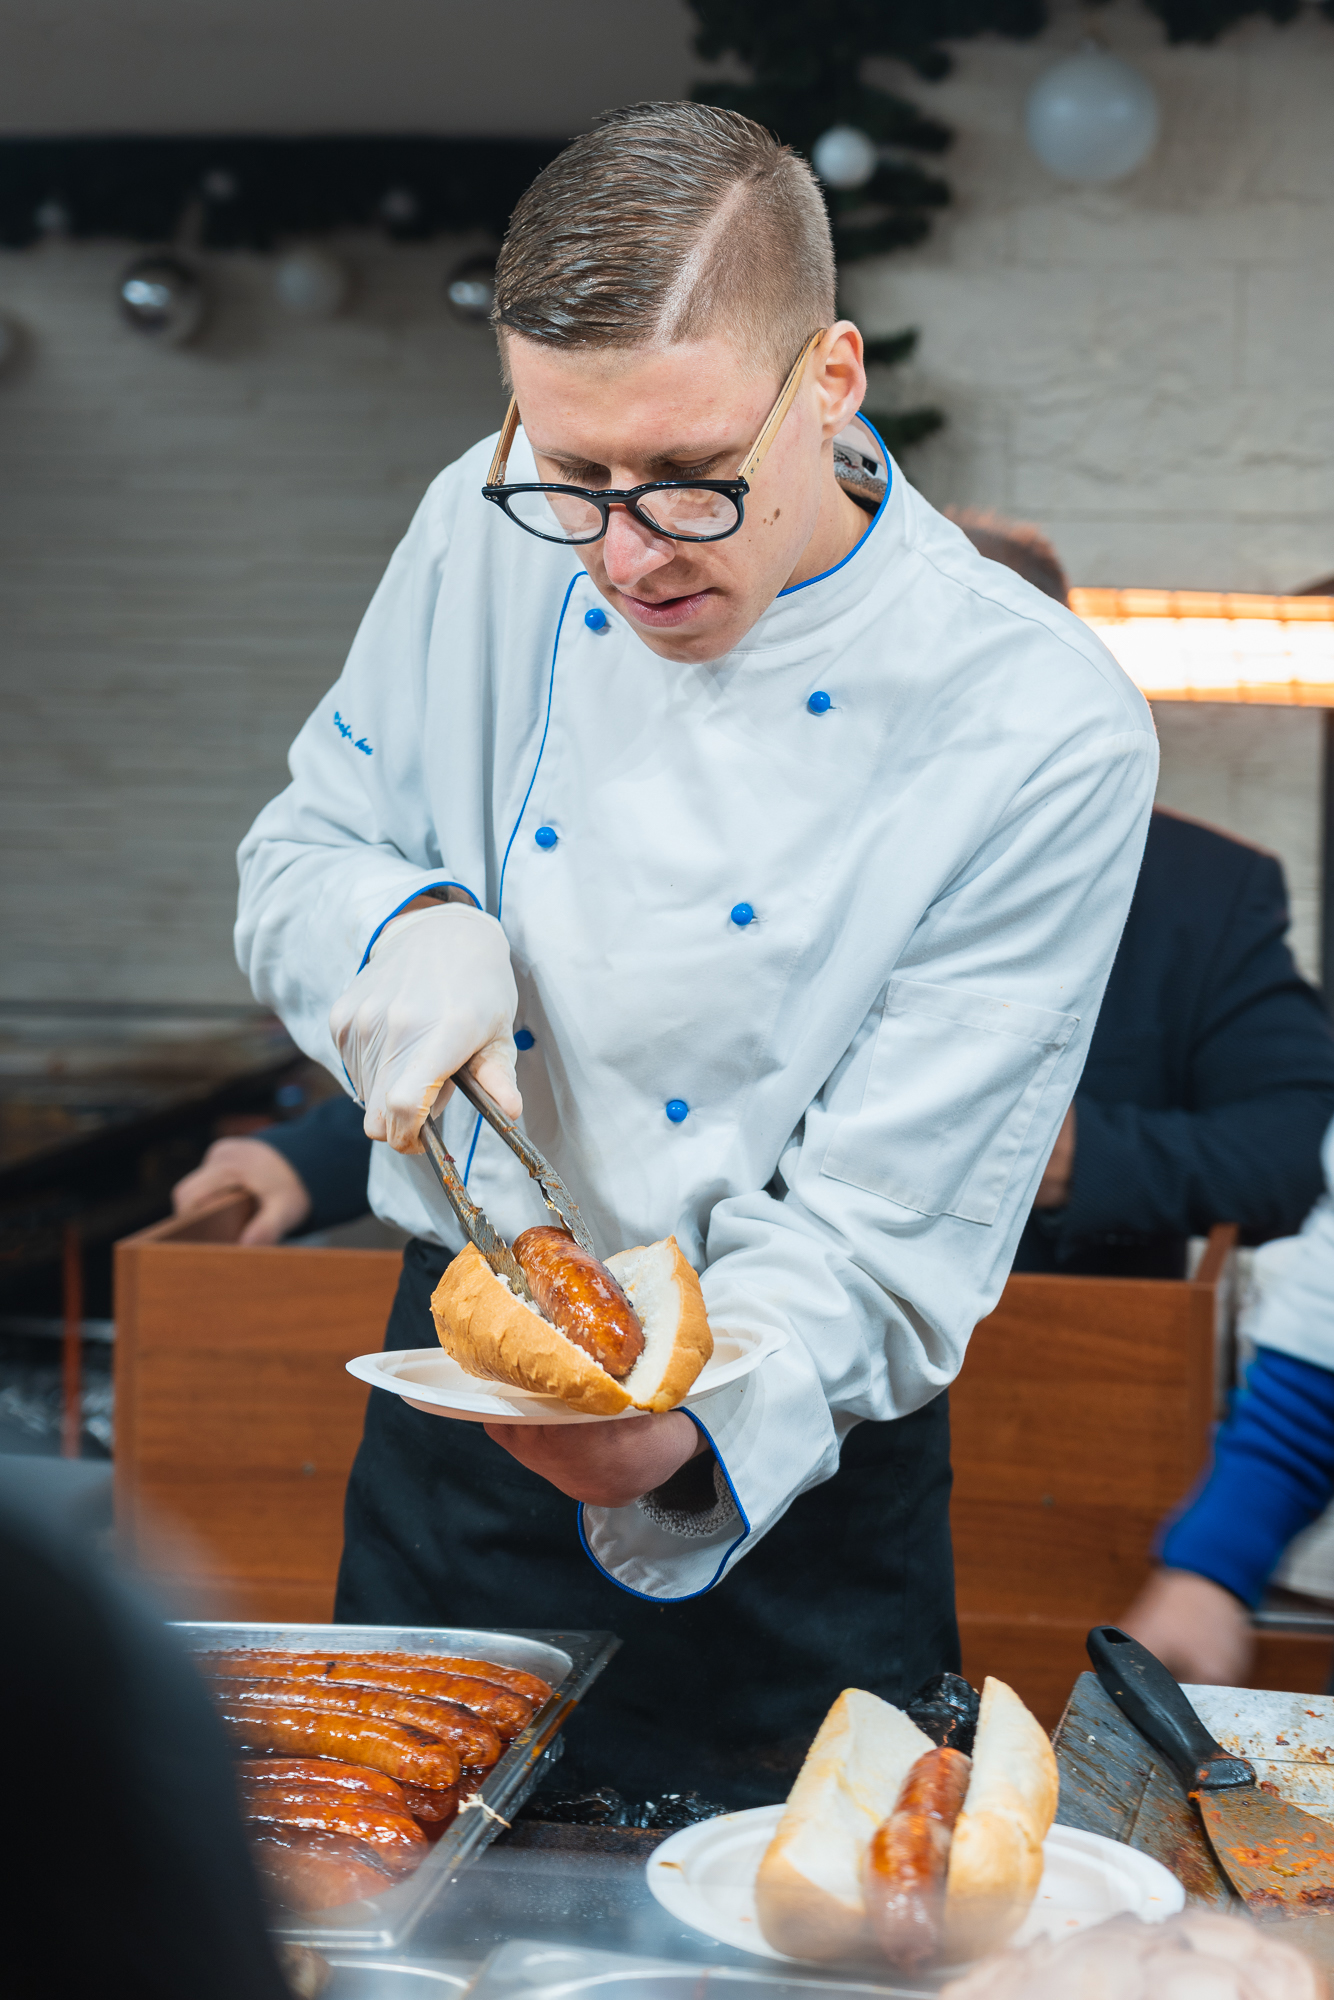 A chef preparing a hot dog at the Christmas market in Budapest,